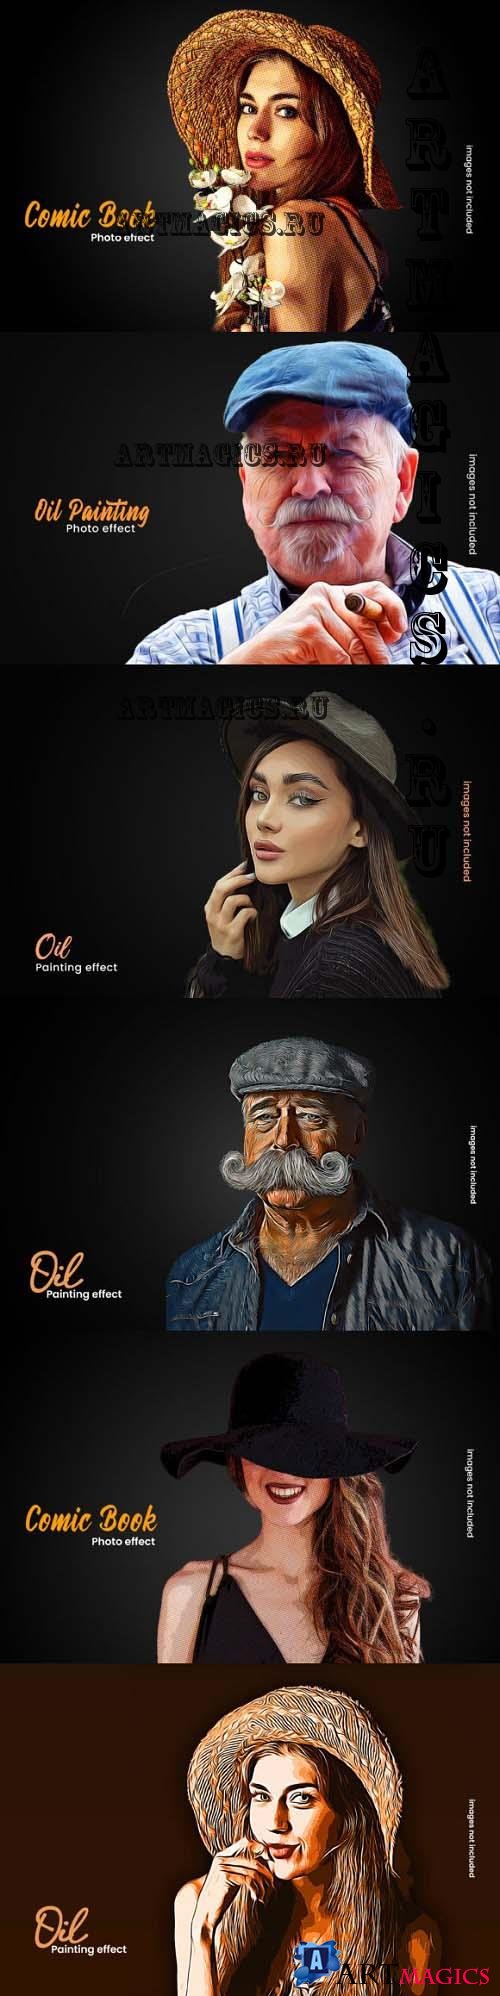 Comic Book and Oil Painting Photo Effect Bundle